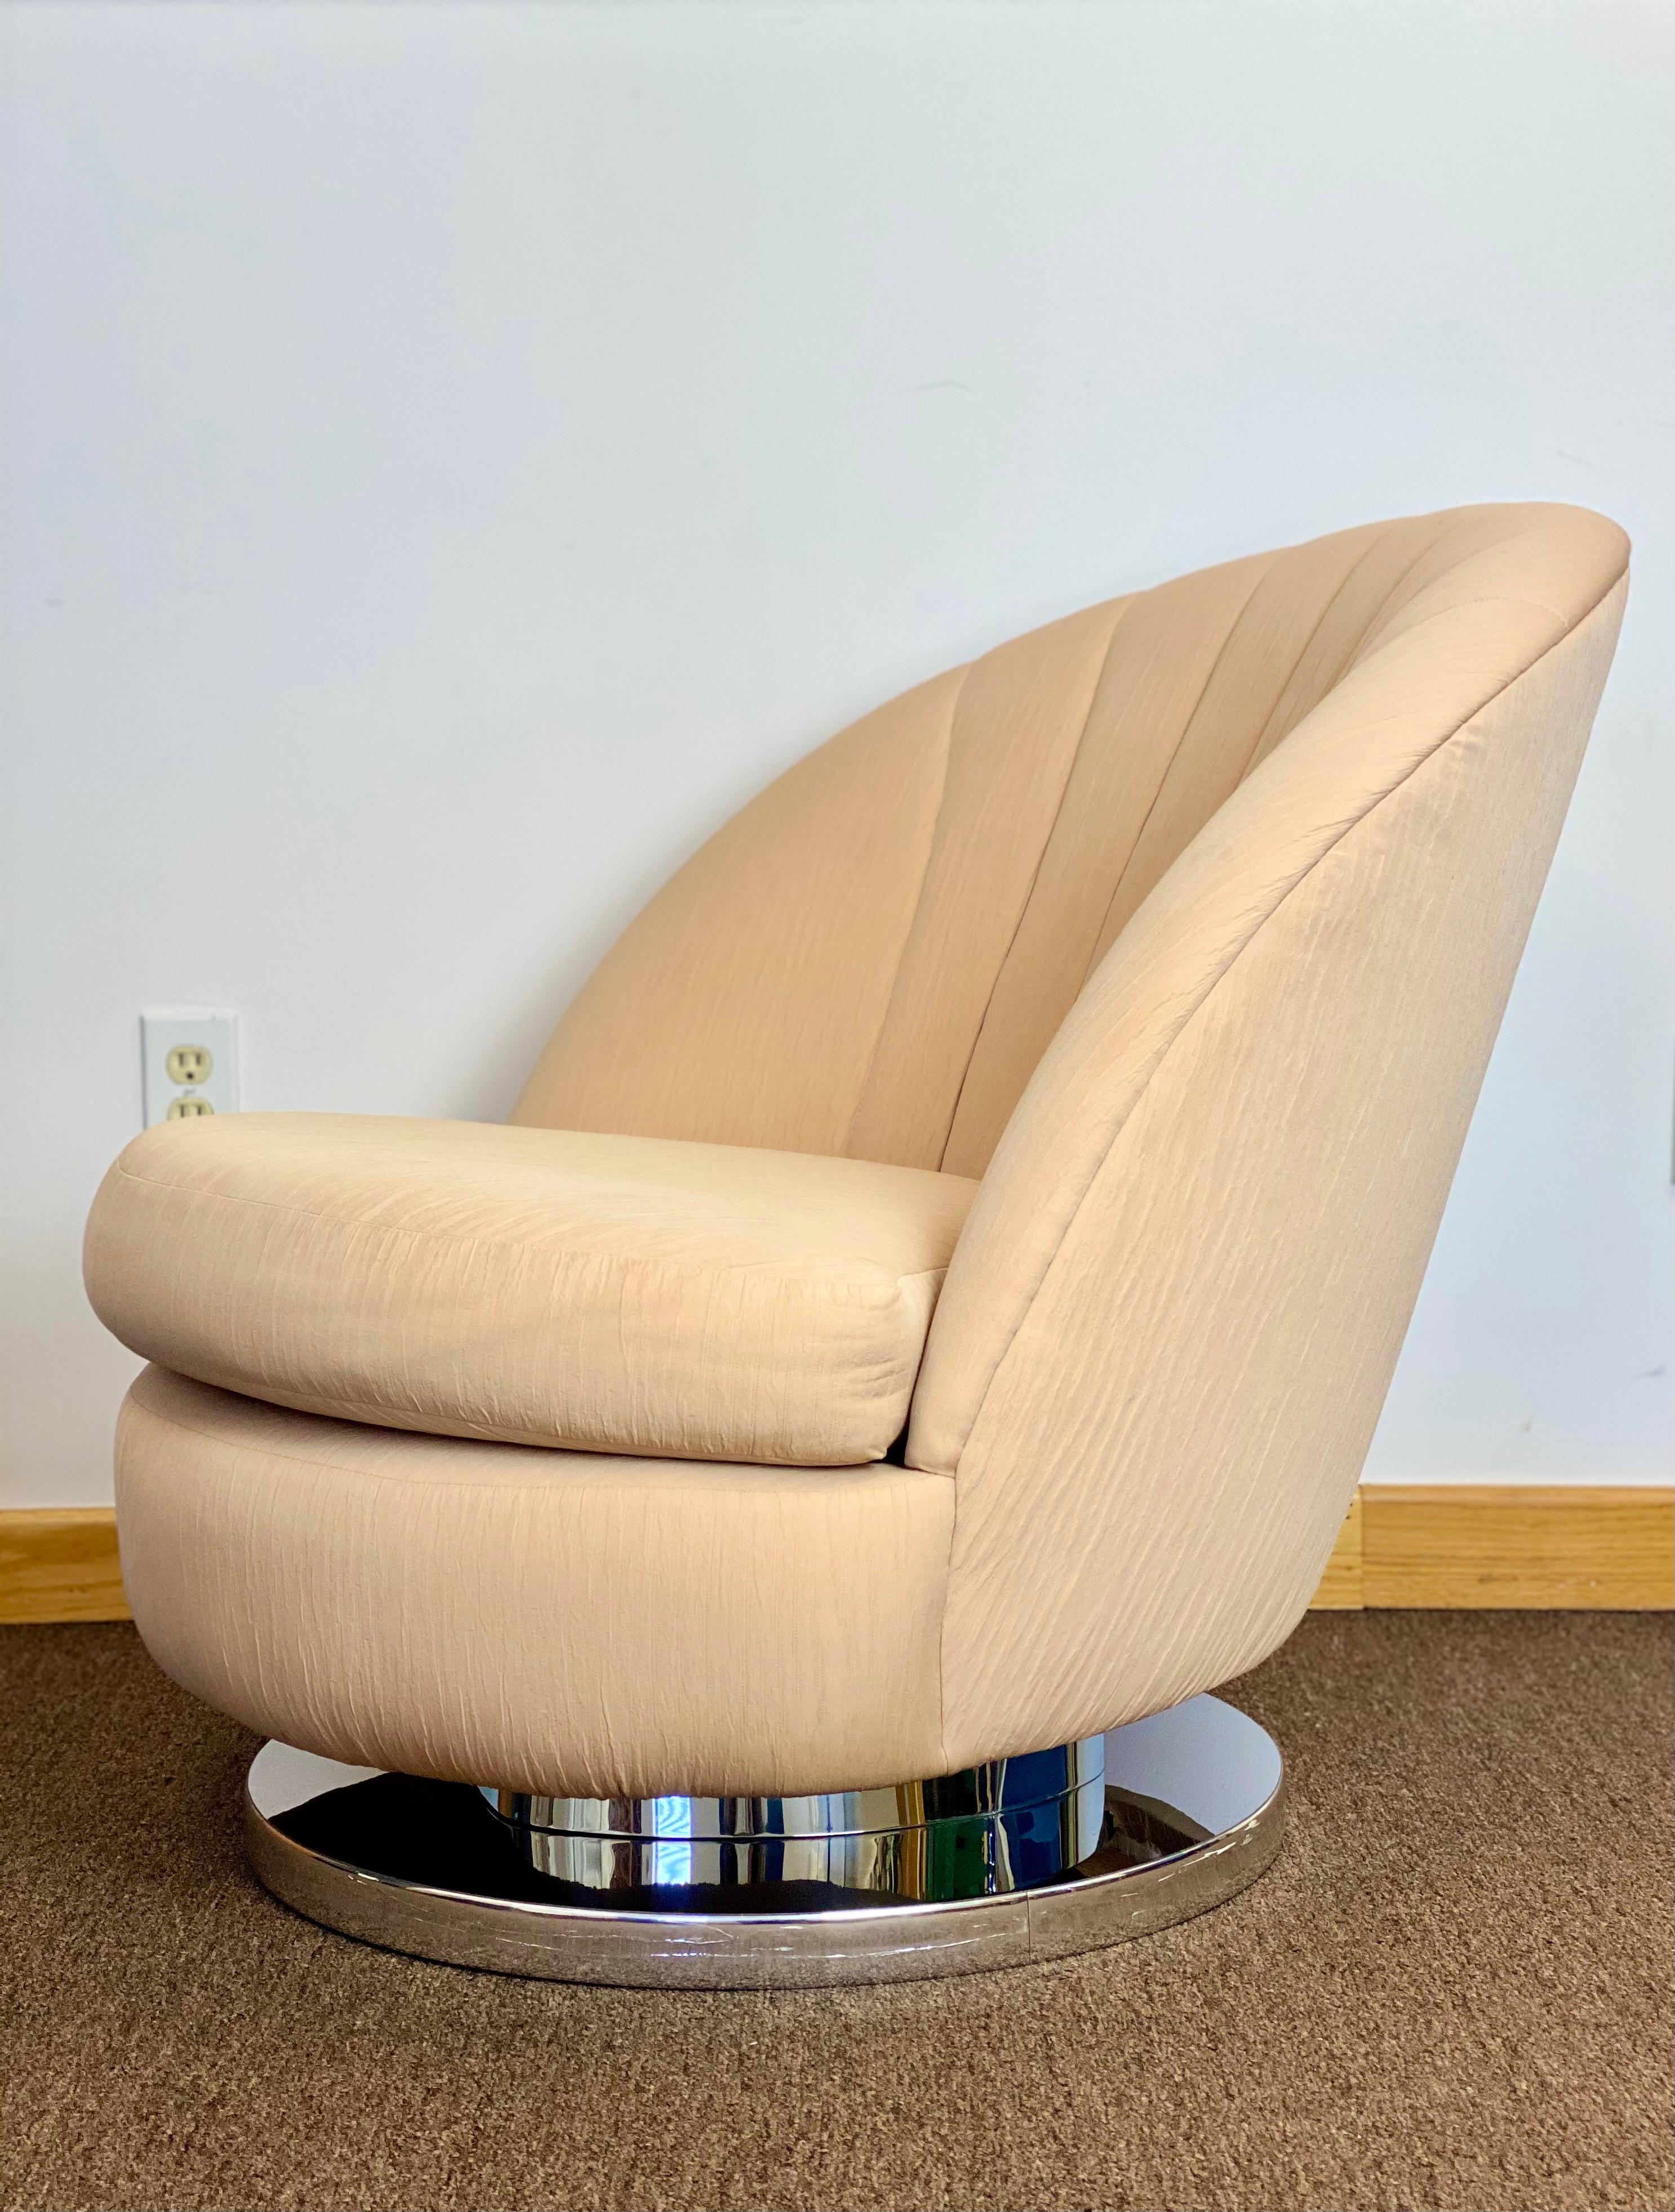 We are very pleased to offer a modern with a touch of Art Deco chair by Milo Baughman for Thayer Coggin, circa the 1970s. This piece showcases a tailored silhouette with a tight back cushion in a subtle clamshell design and a loose seat cushion. A